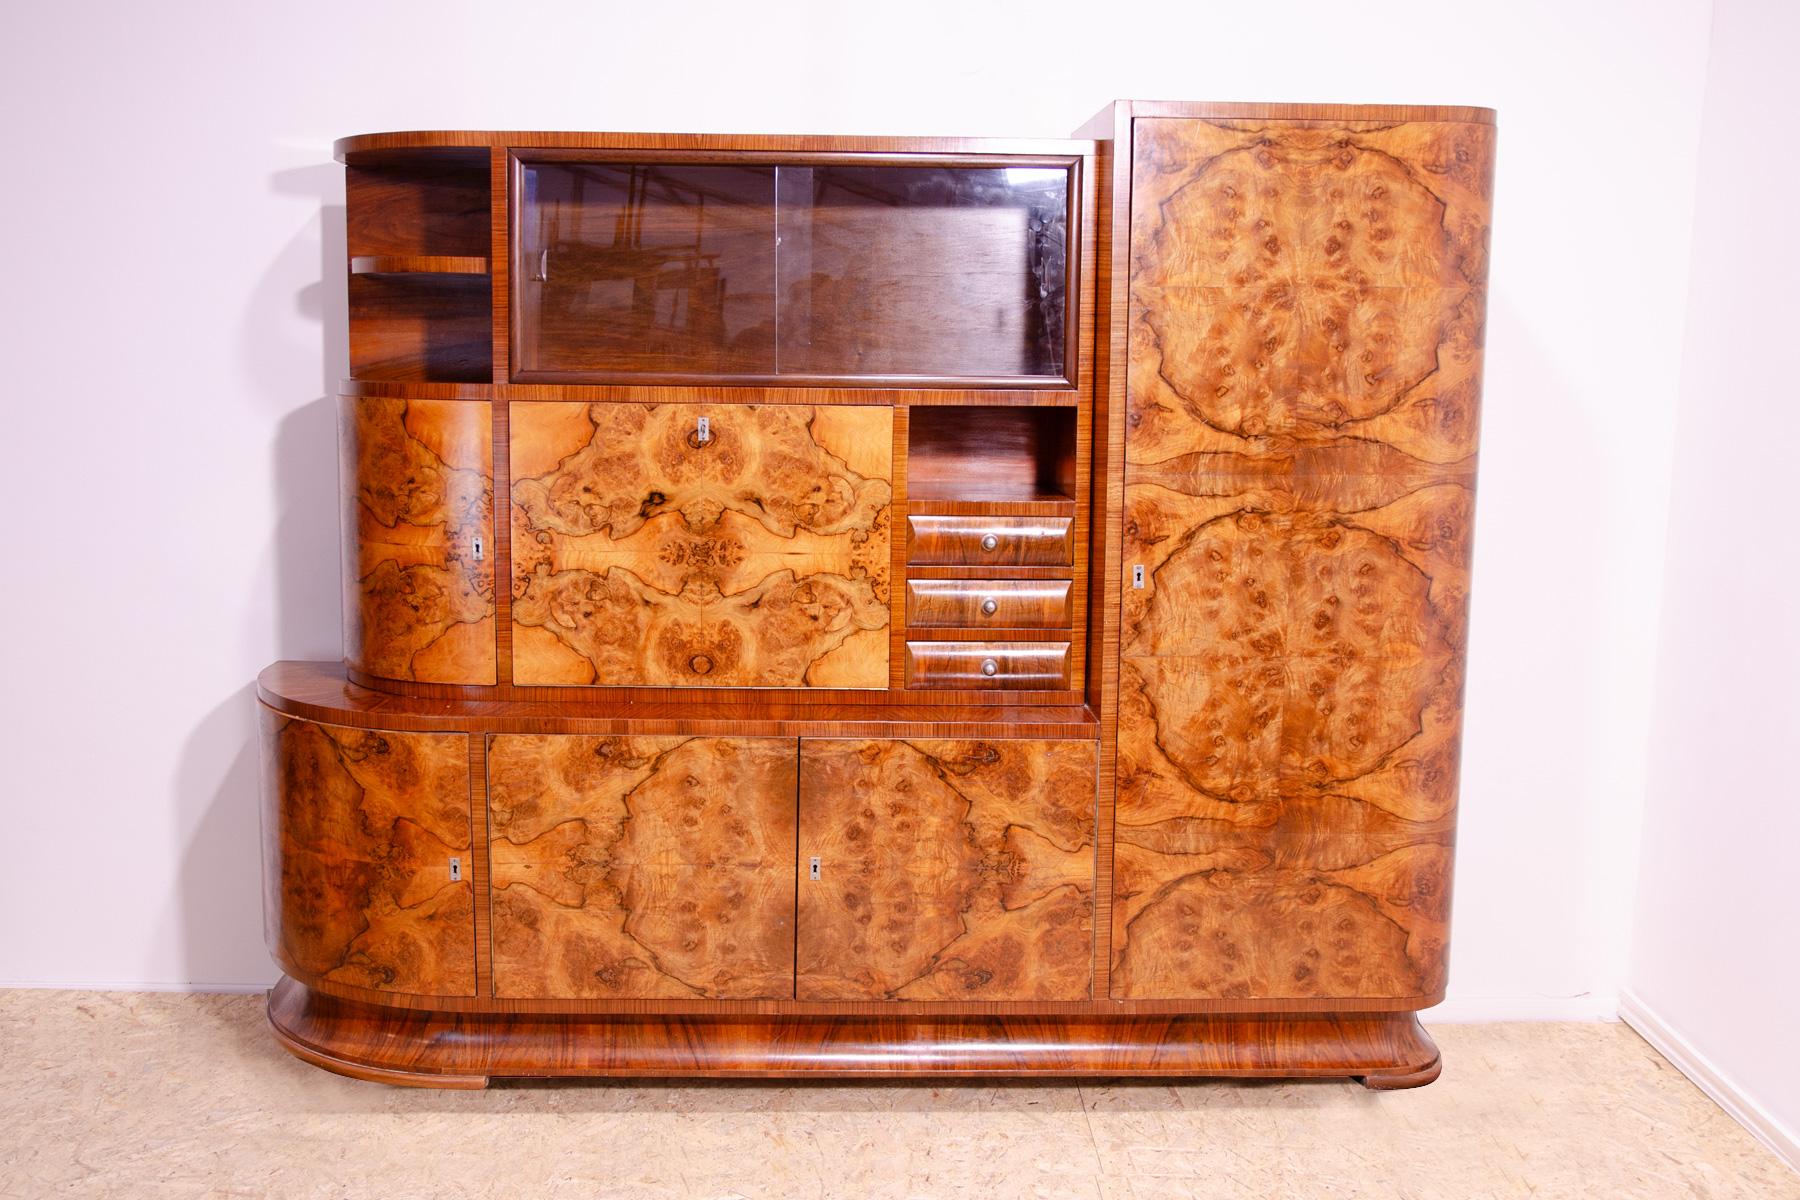 This huge ART DECO bookcase or sideboard was made in the 1930s in the former Czechoslovakia.
The bookcase has a beautiful rounded shapes, several storage spaces, including a glass section for books, etc. It also includes a bar section.
It is made of